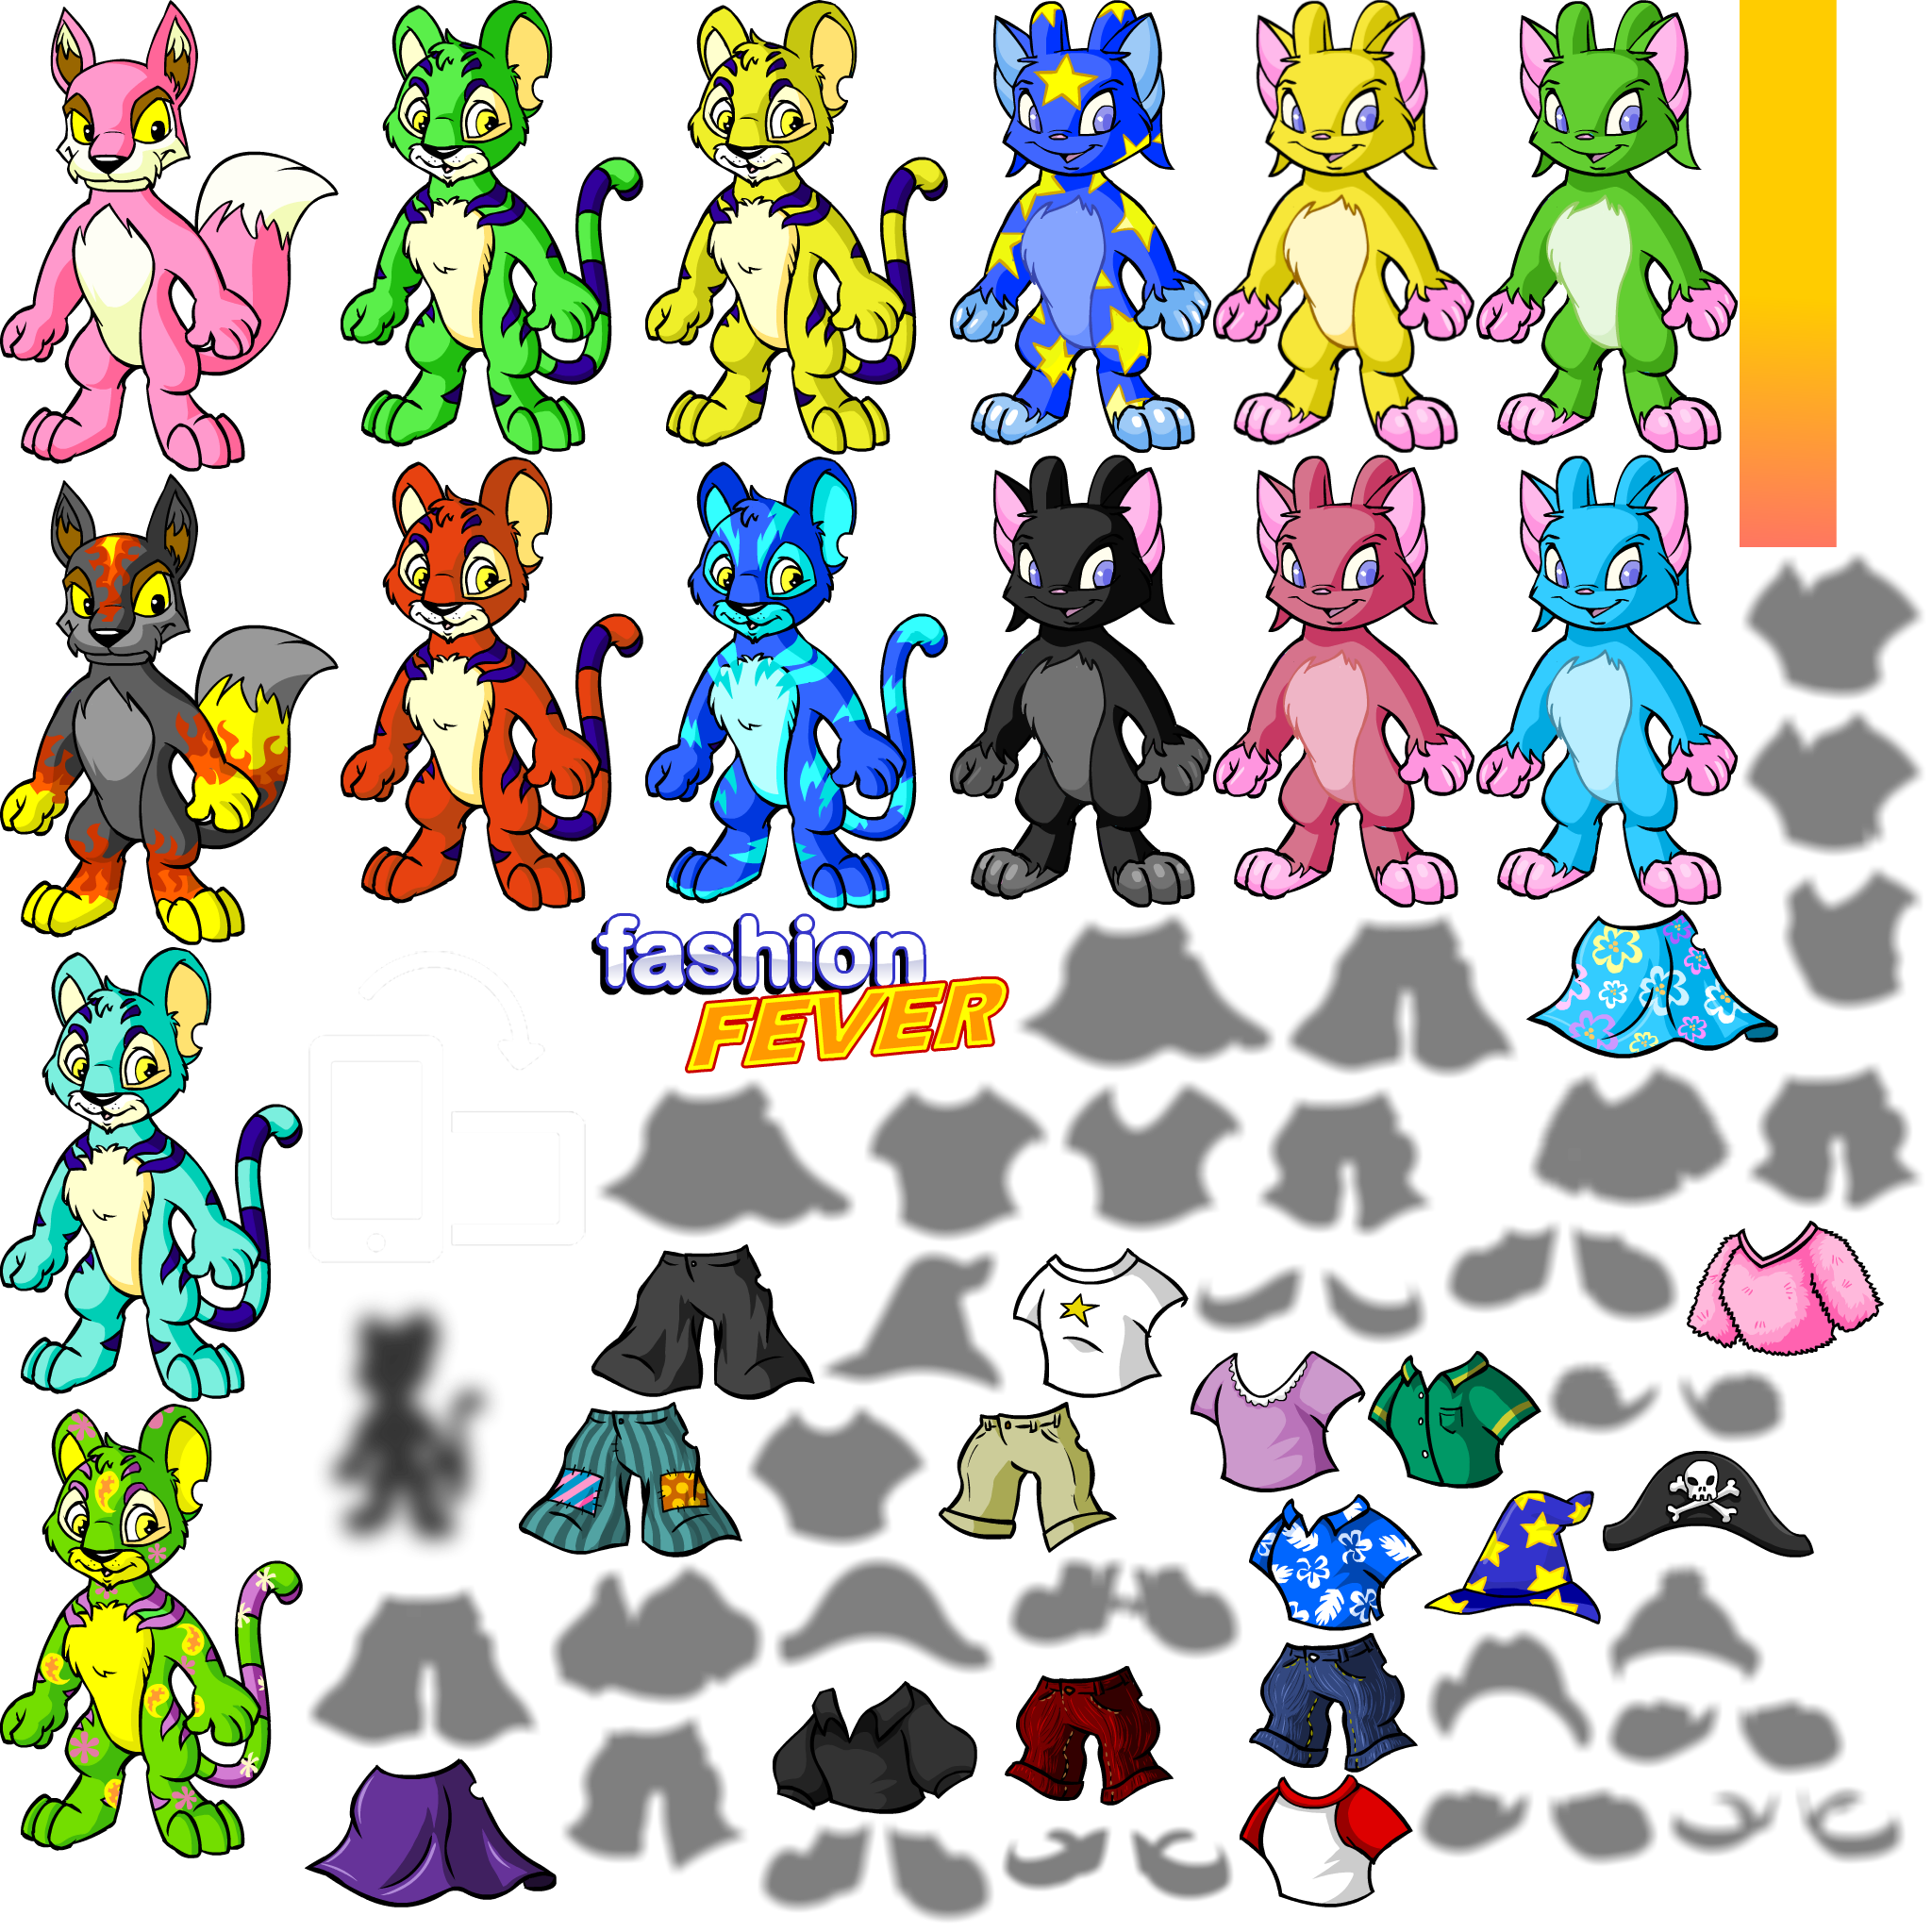 https://images.neopets.com/games/h5/fashionfever1391/images/game_atlas_P_2.png